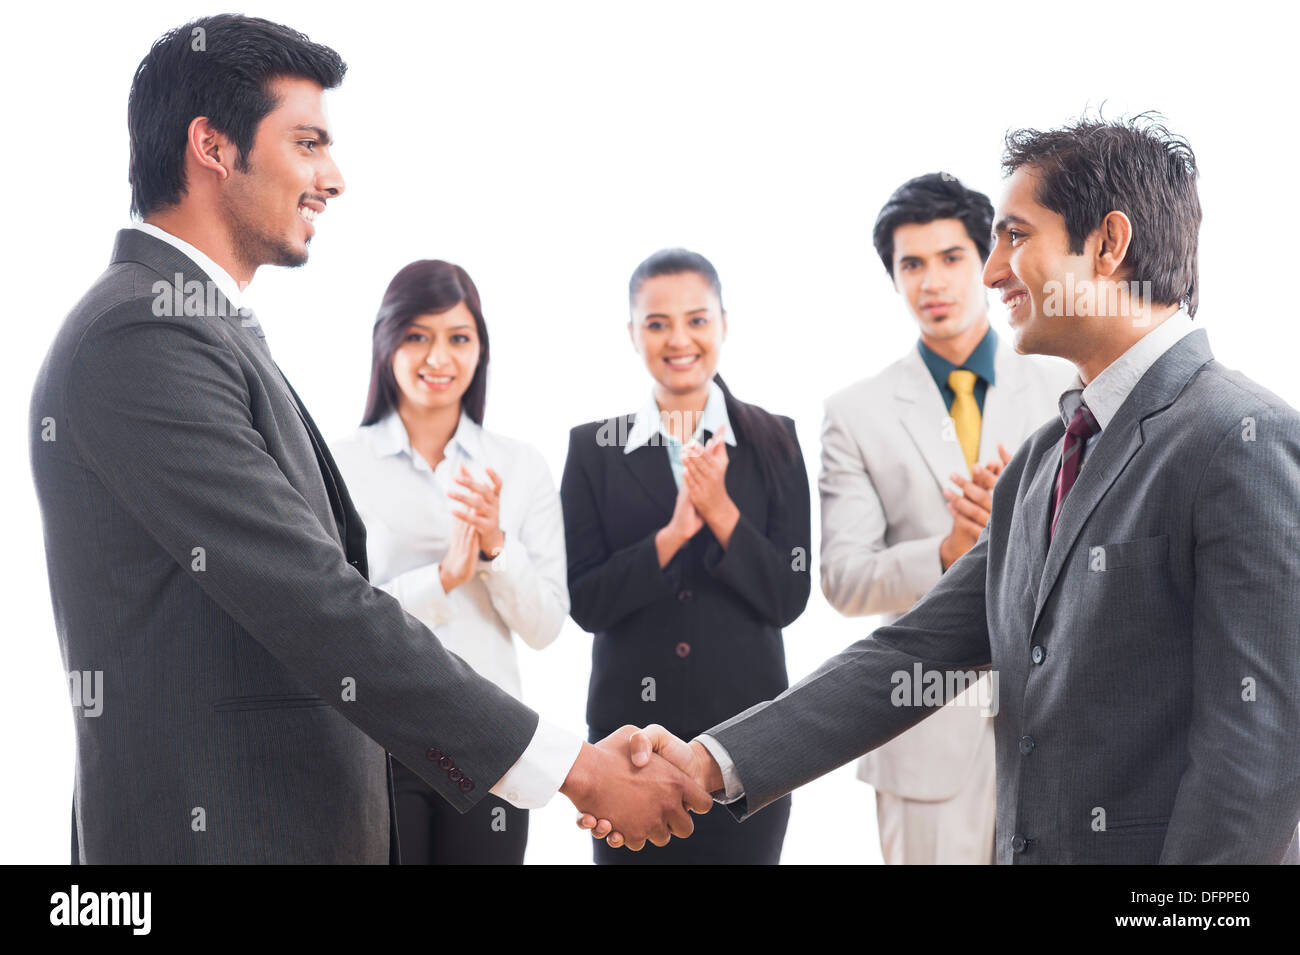 Two businessmen shaking hands with their colleagues applauding Stock Photo